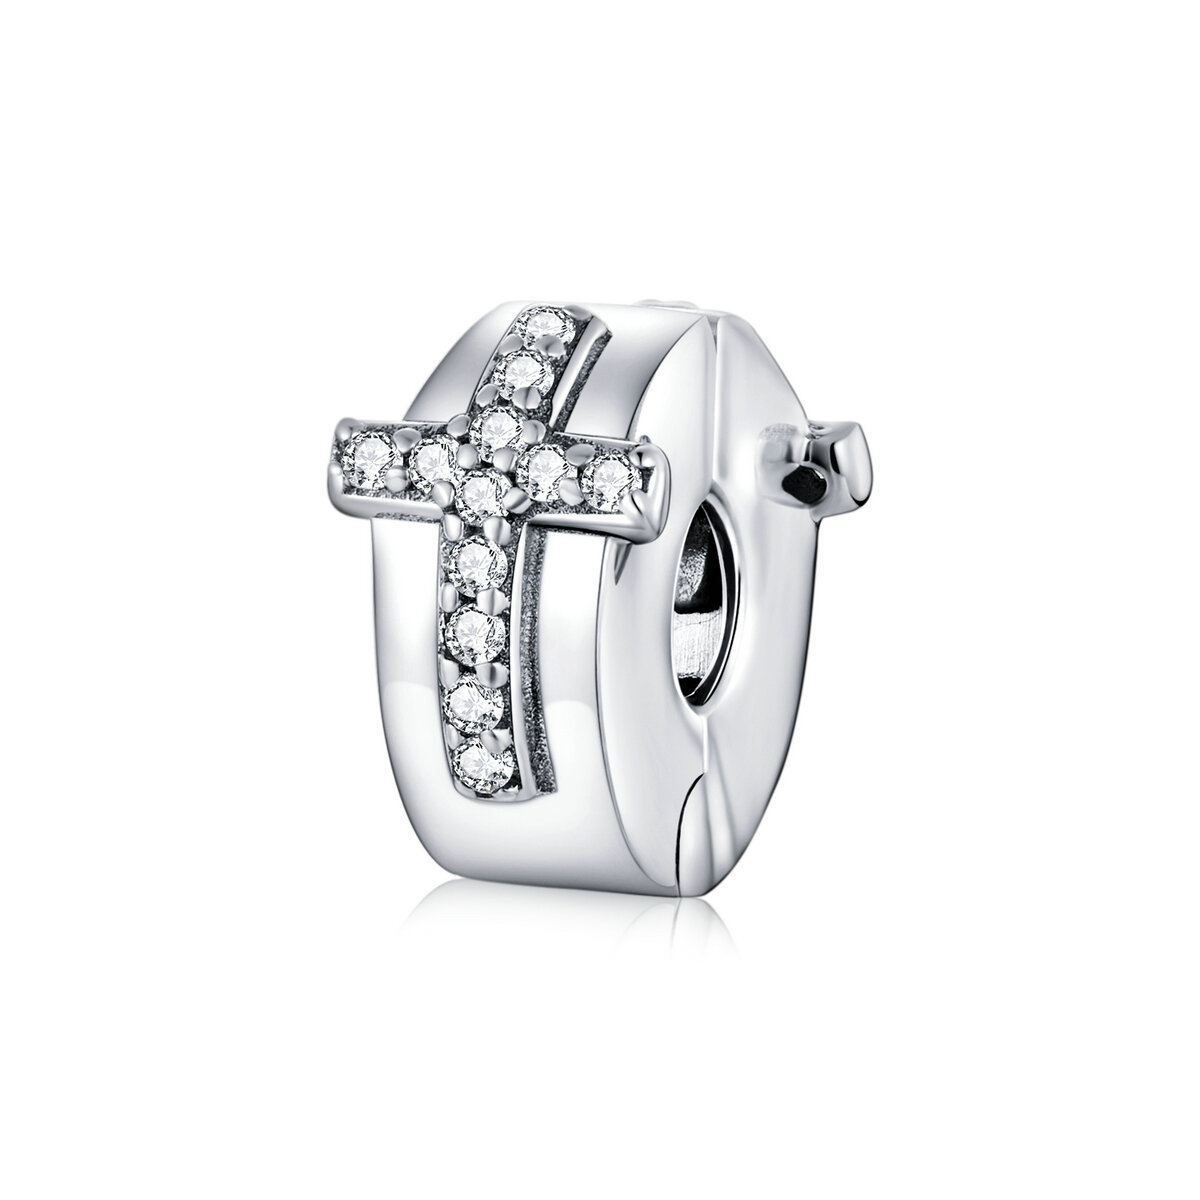 GemKing SCC1497 Cross round clip S925 Sterling Silver Charm